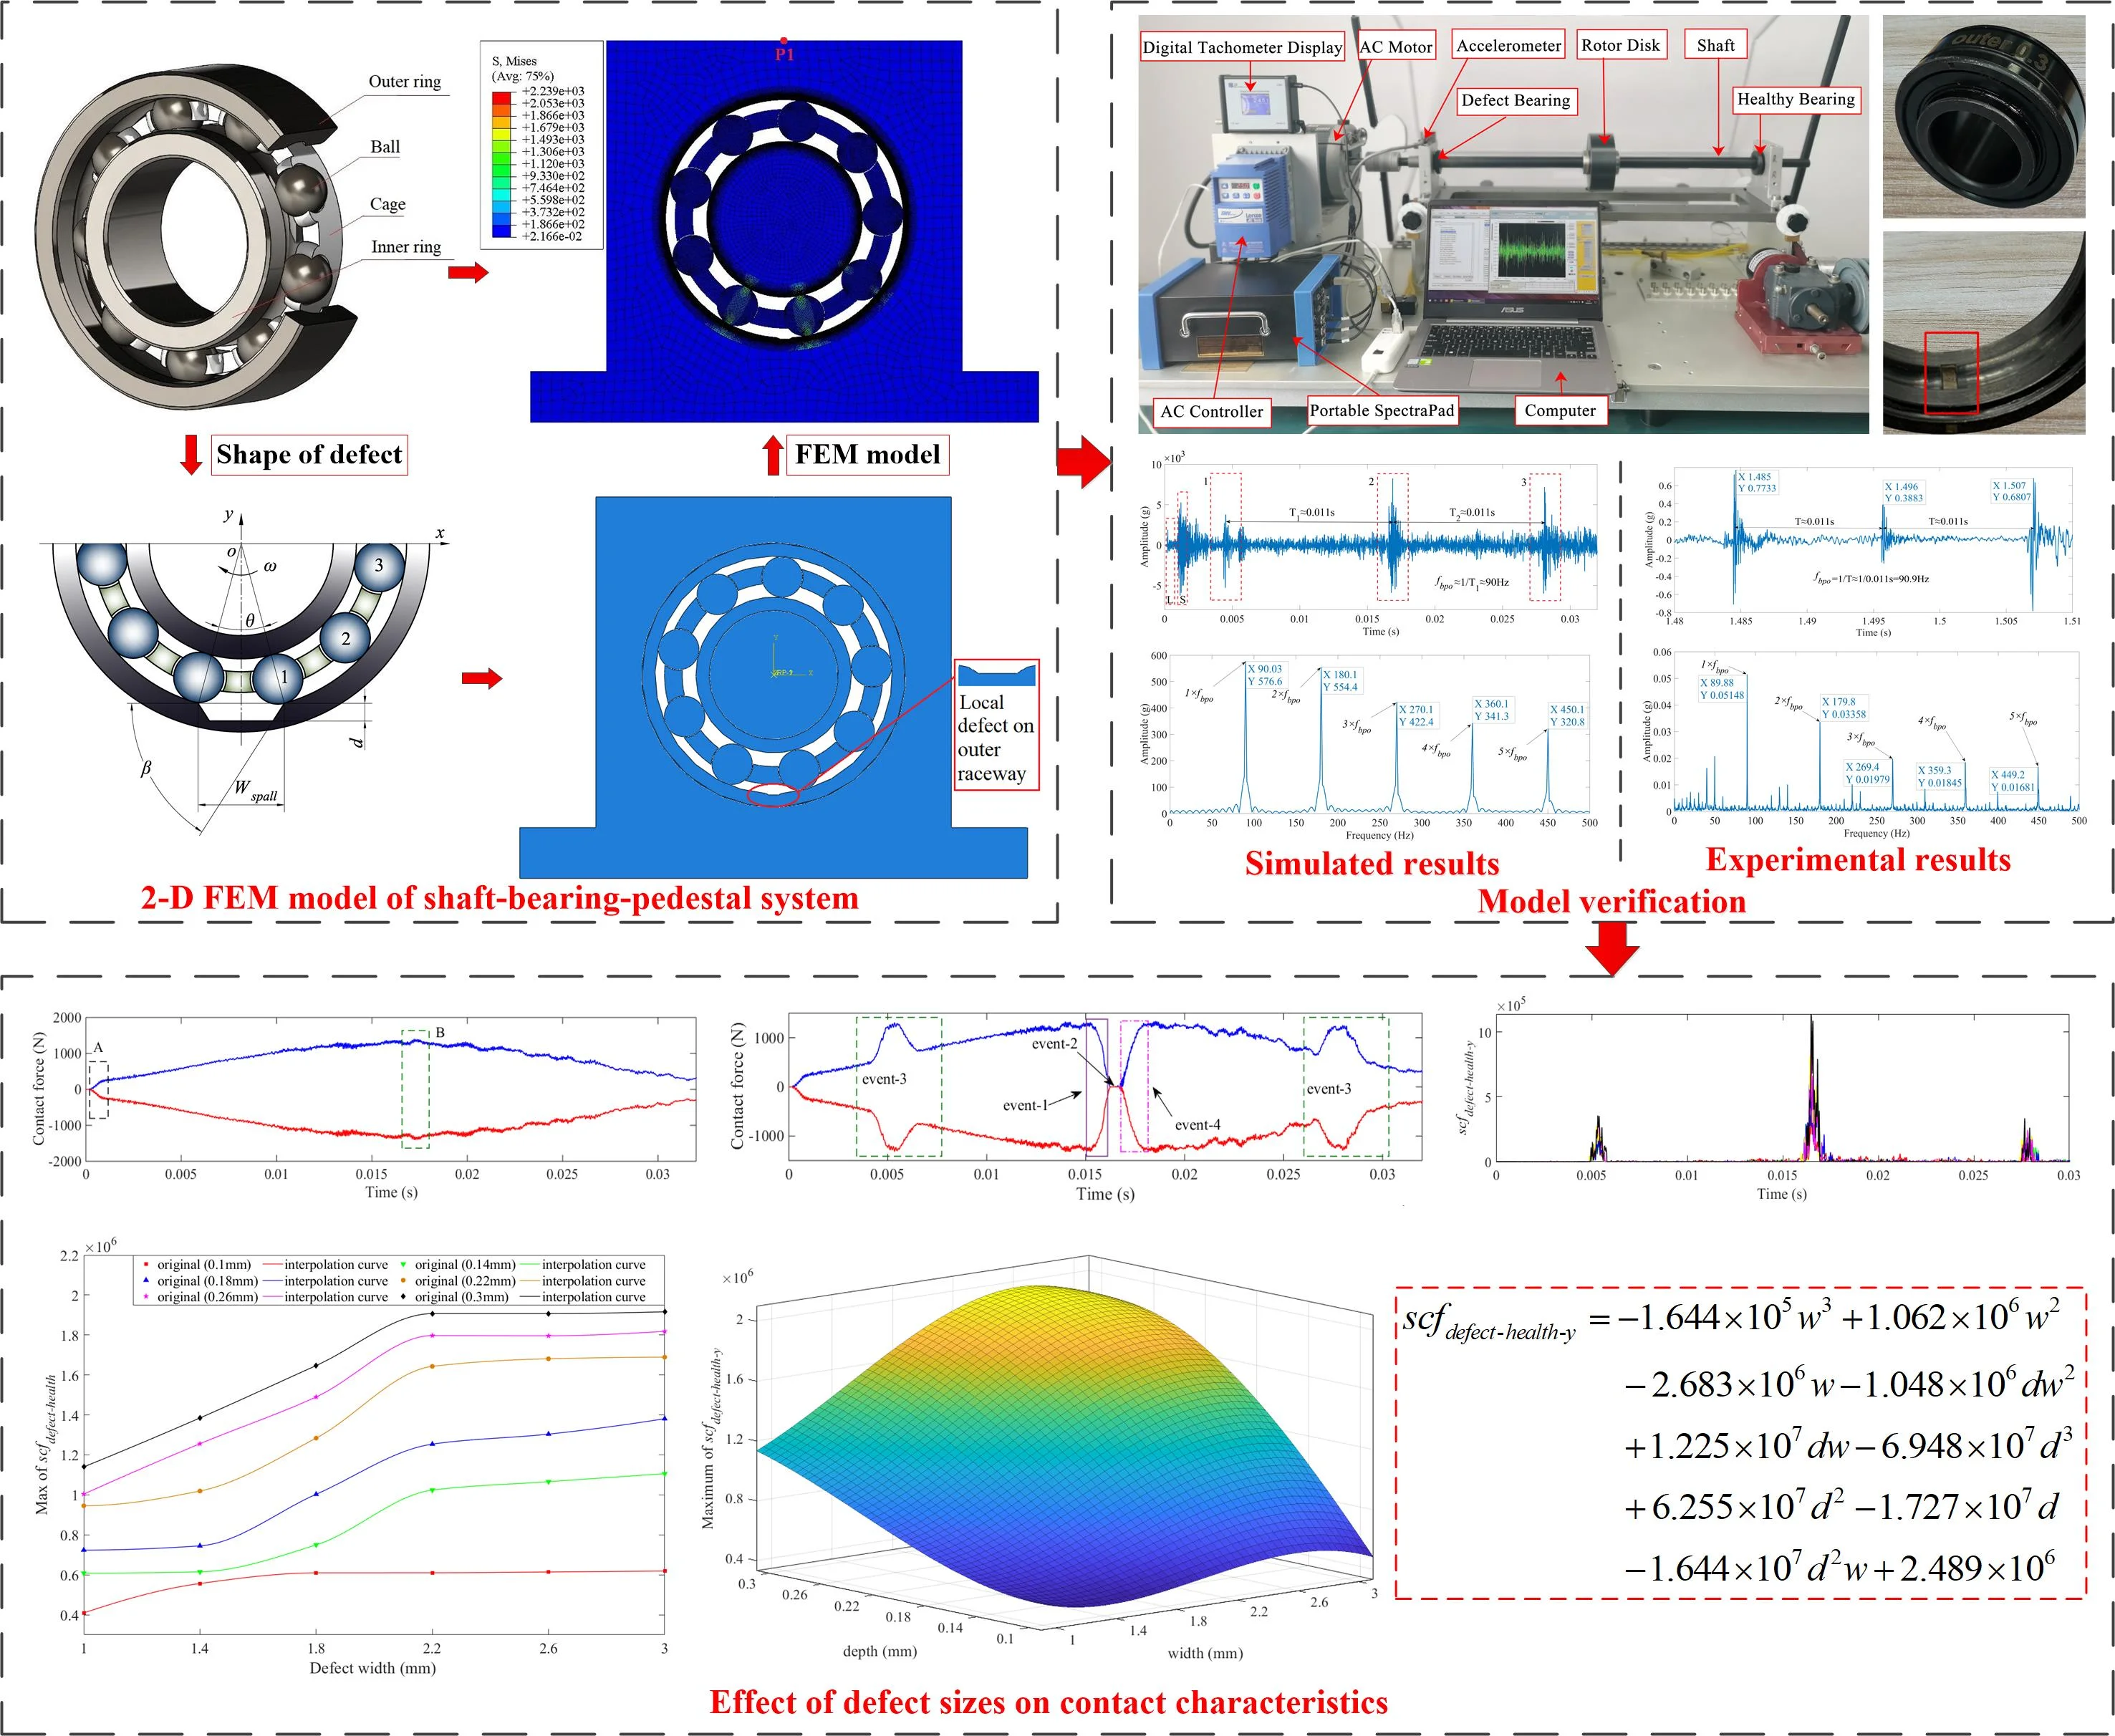 Dynamic response and contact characteristics of shaft-bearing-pedestal system with localized defect using 2-D explicit dynamics finite element model